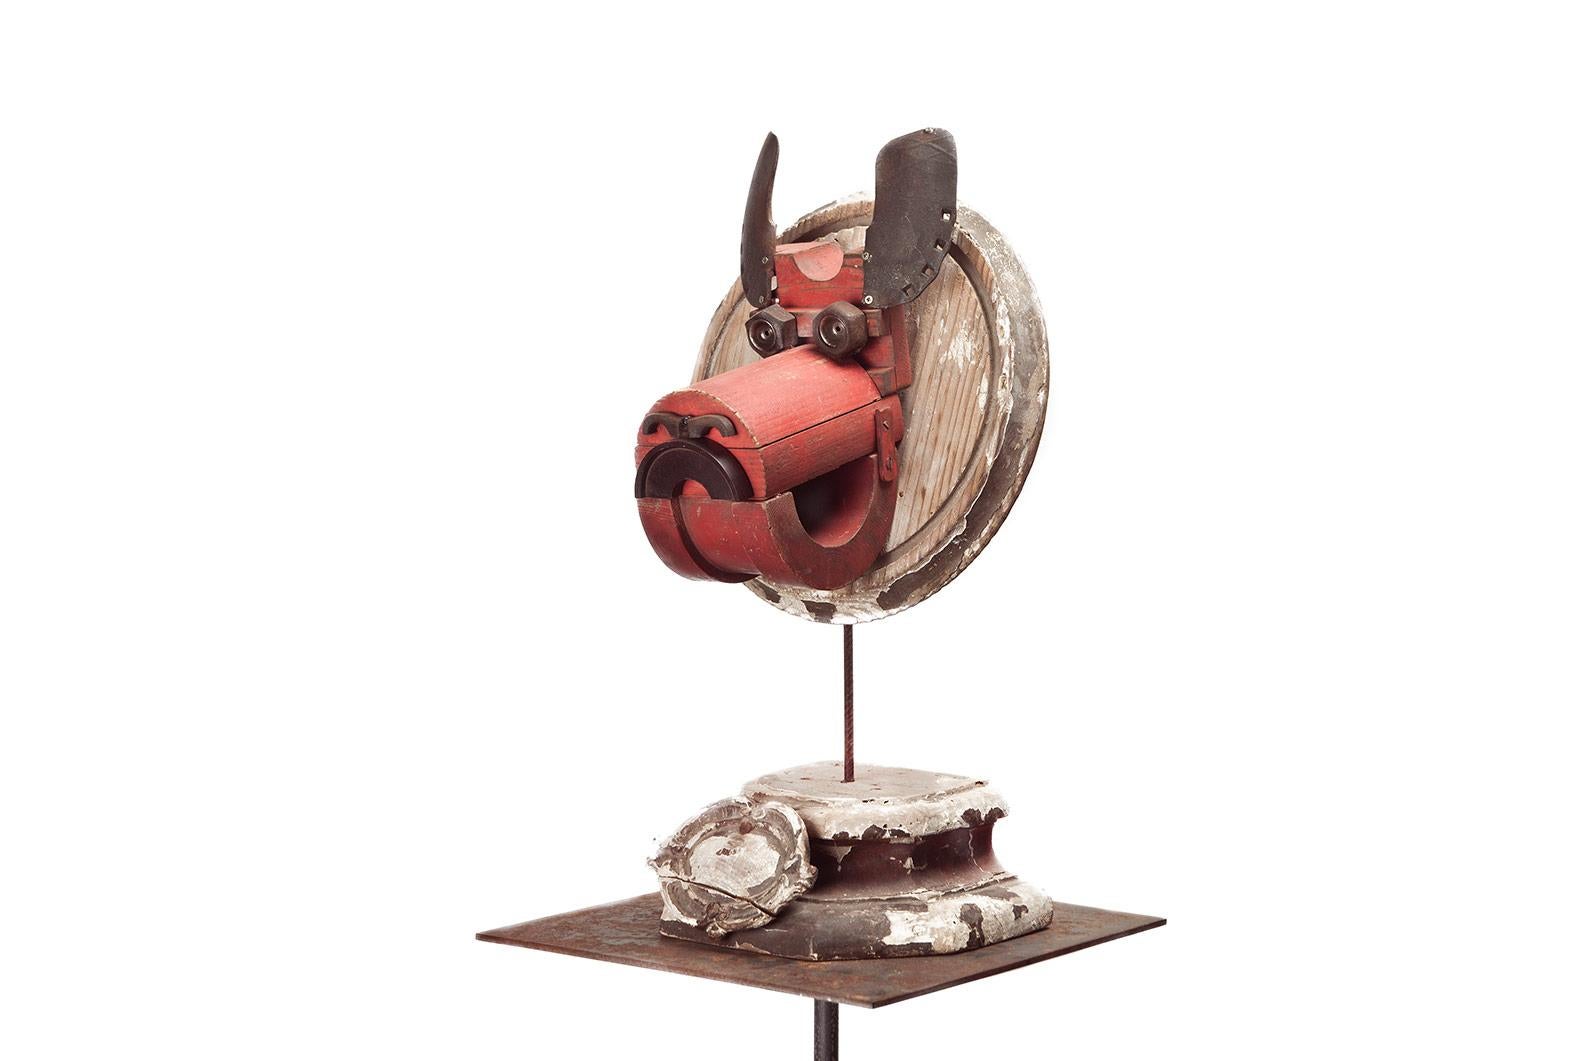 Máscara Boby - 21st Cent, Contemporary Sculpture, Figurative, Recycled Objects